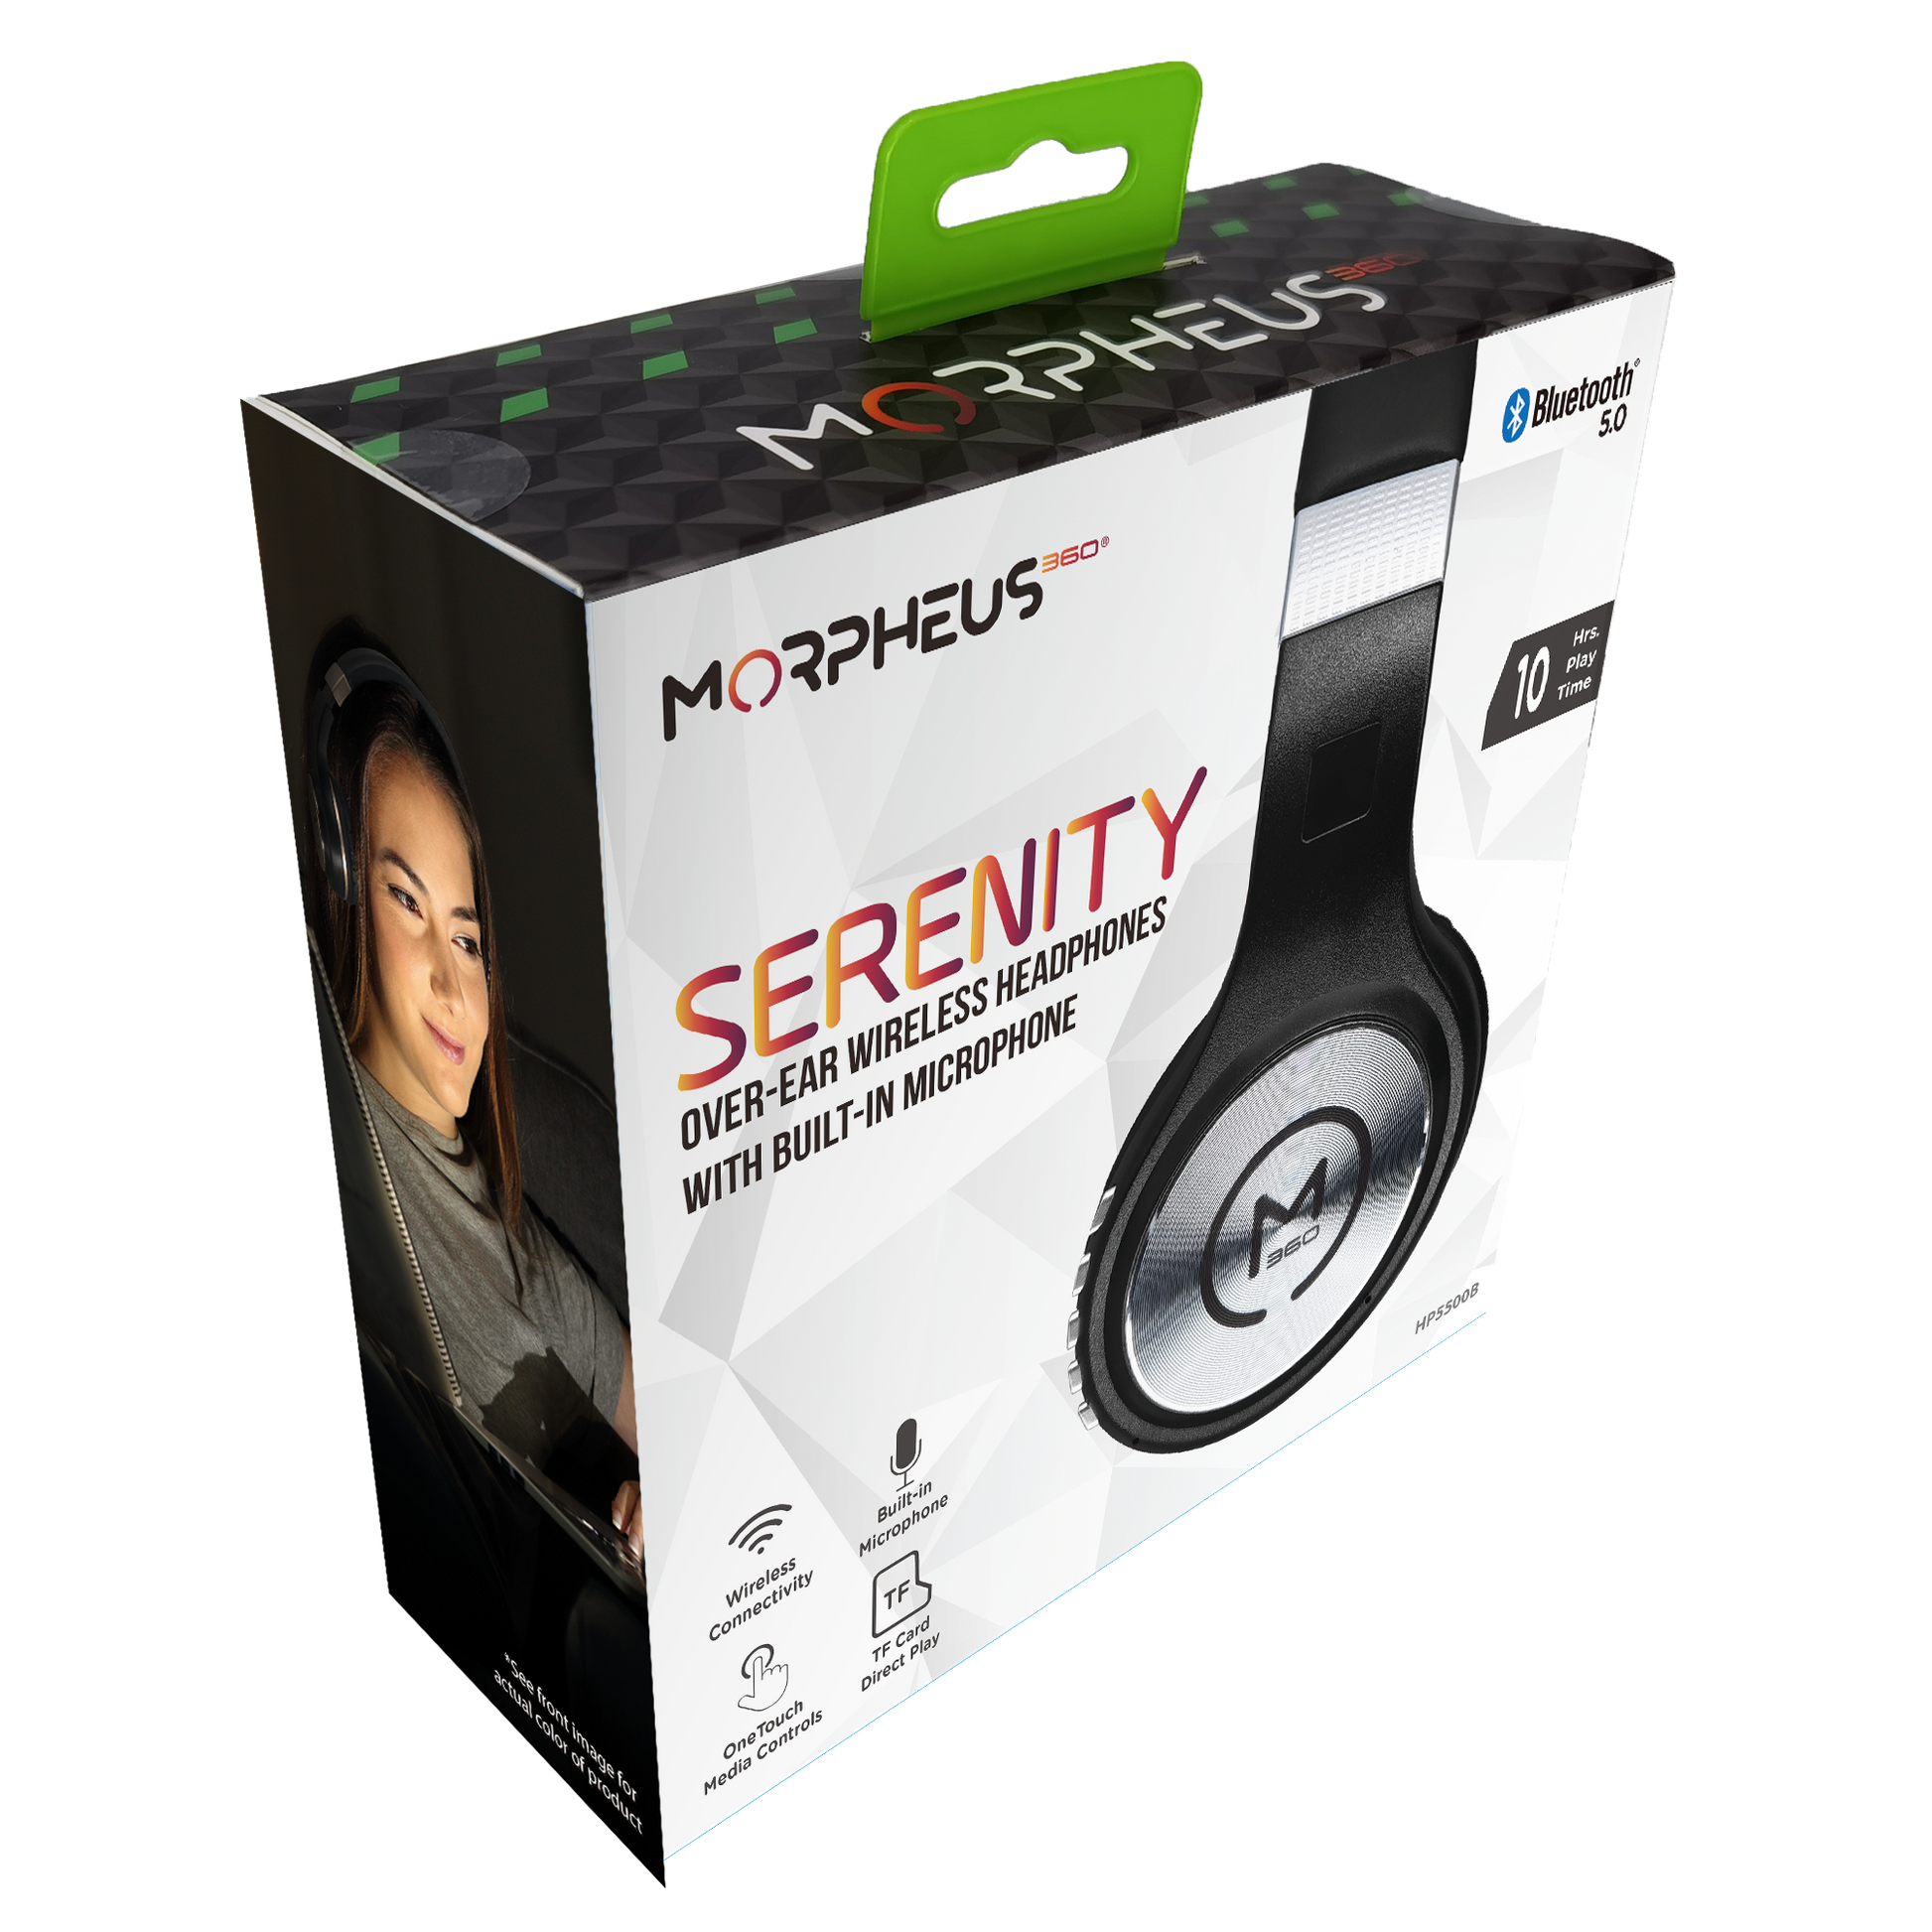 Photo of Morpheus 360 Serenity Wireless Over Ear Headphones Retail Packaging. Showing on the front of the package is a side view of the Serenity headphones (Black with Silver Accents), Bluetooth 5.0, 10+ Hours of Playtime, Wireless Connectivity, Built-In Microphone, One Touch Media Controls, TF Card Direct Play.